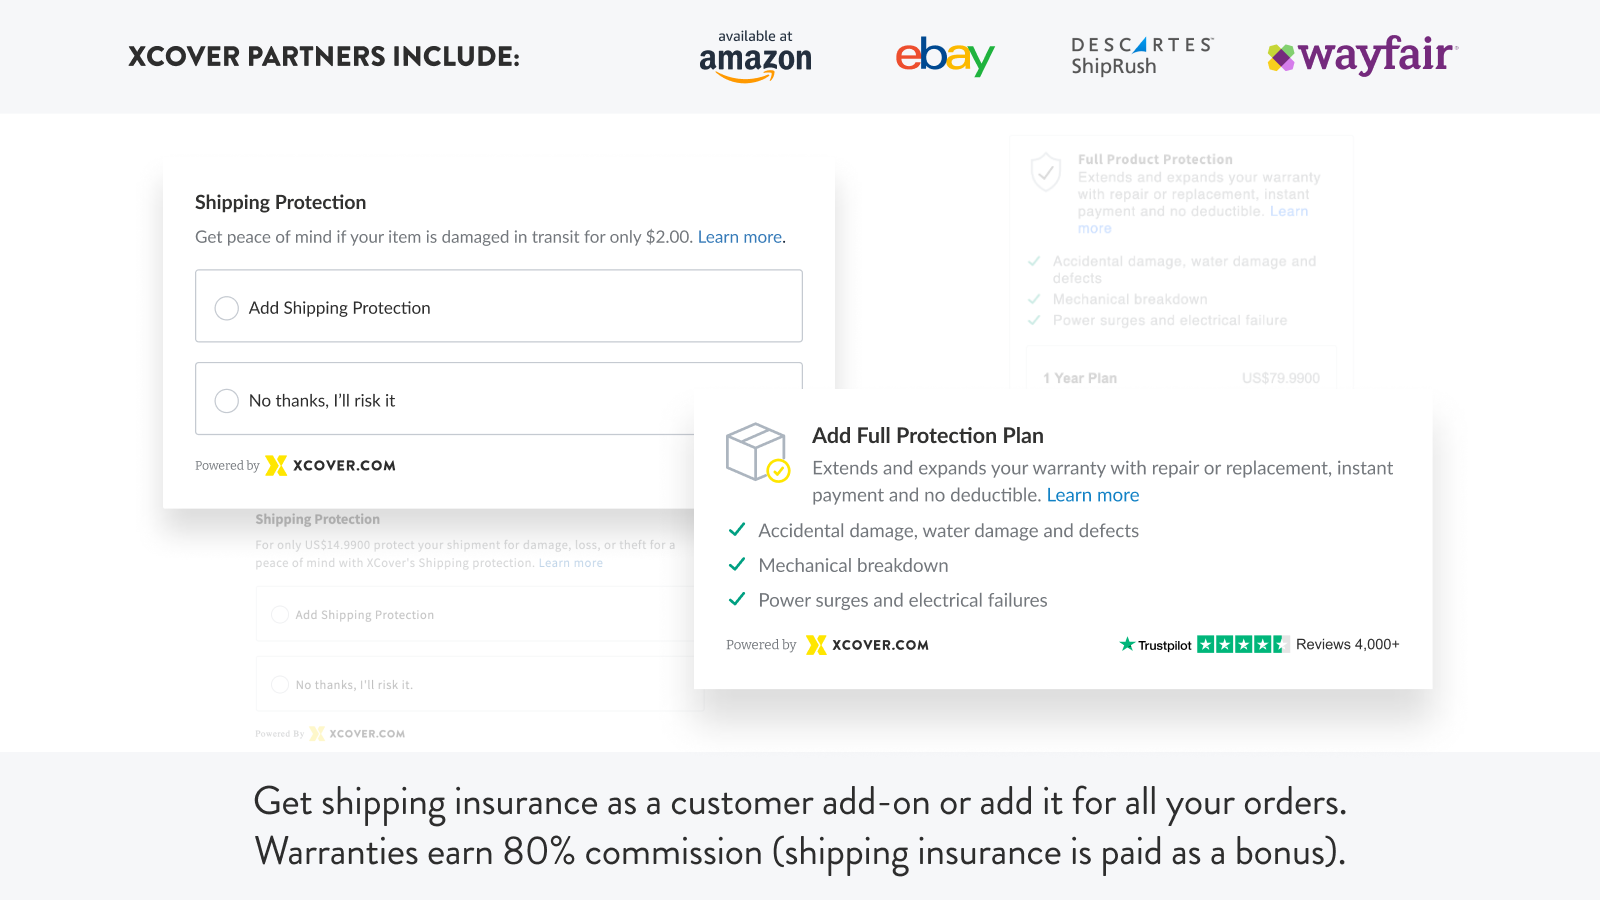 Get shipping insurance as a customer add-on